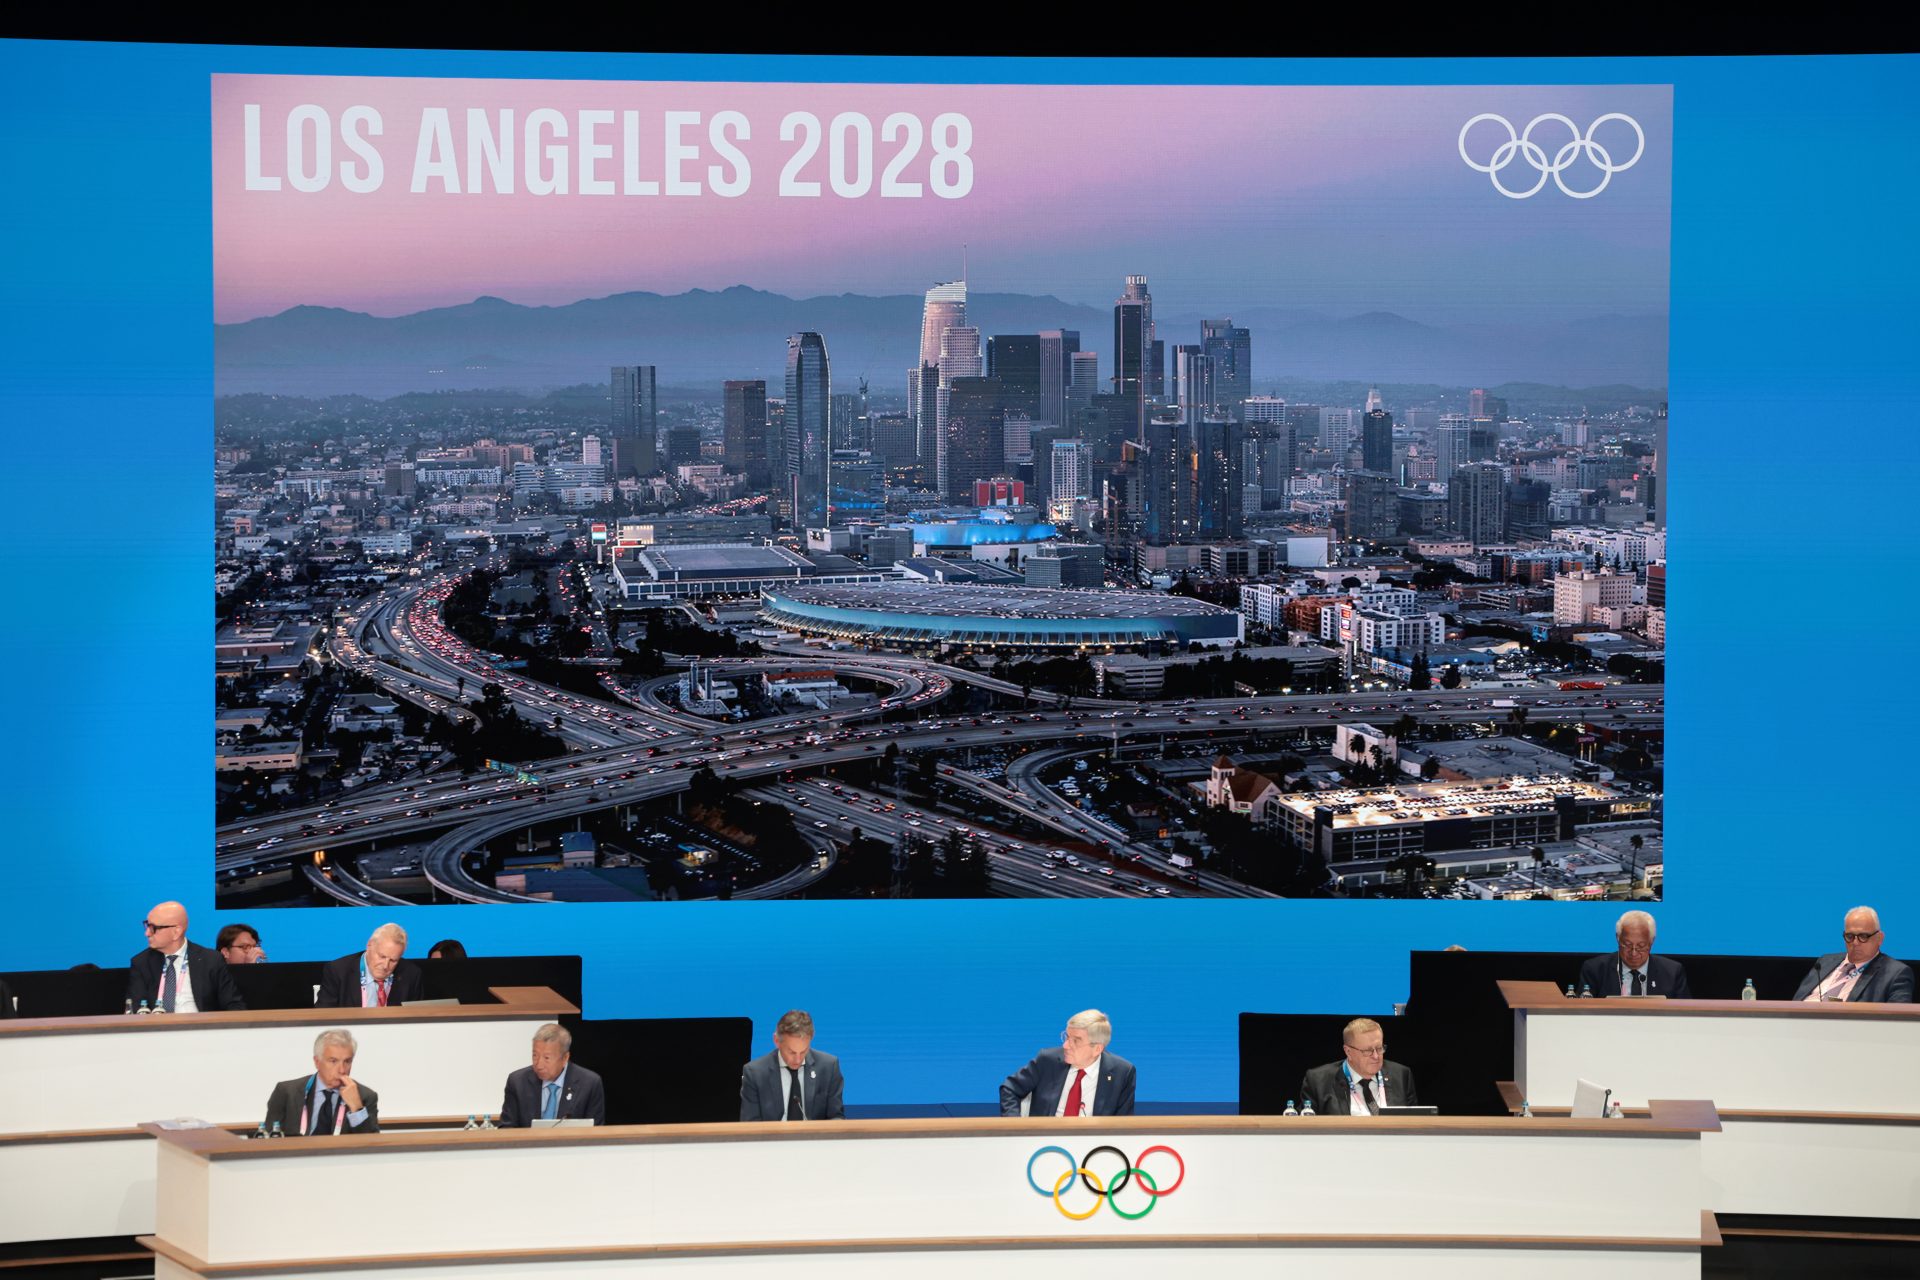 The 2028 Games